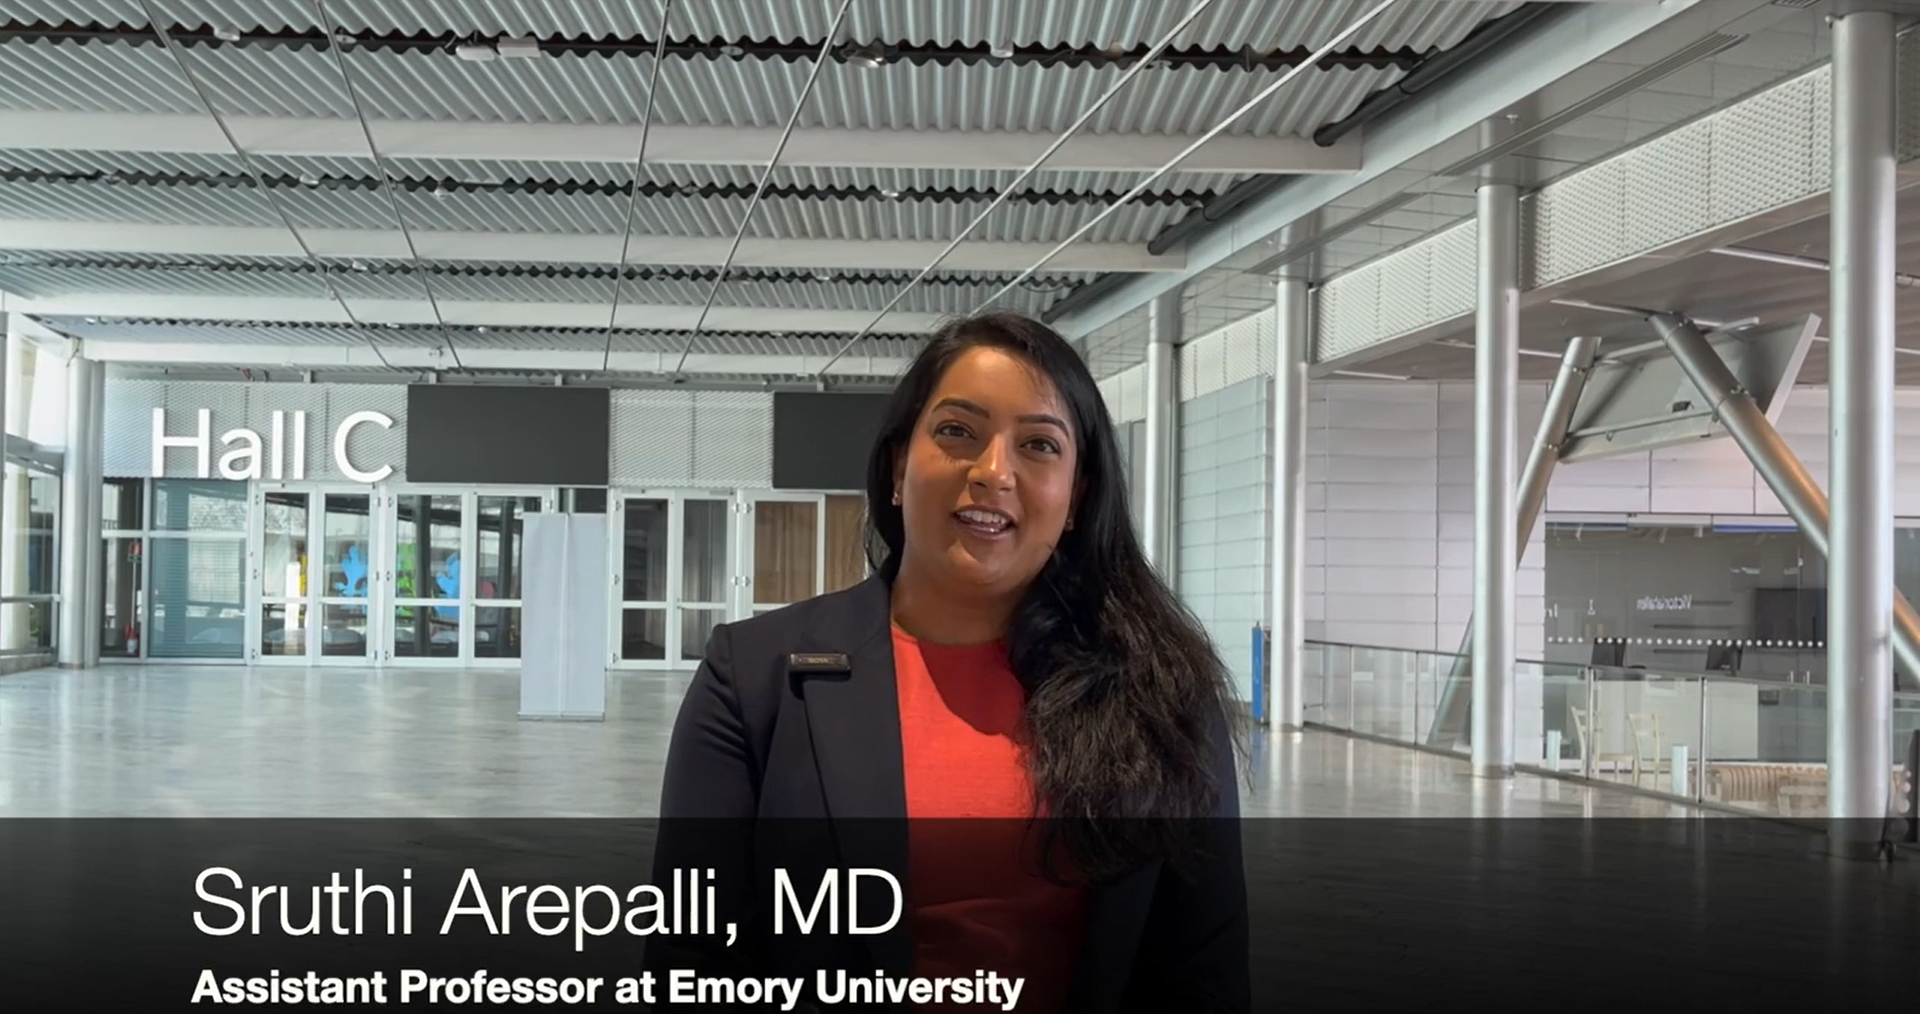 Sruthi Arepalli, MD, spoke with Modern Retina about her presentation, "Assessing retinal vascular changes in alzheimer disease with radiomics: A preliminary study of fundus photography" at the annual ASRS meeting in Stockholm, Sweden.